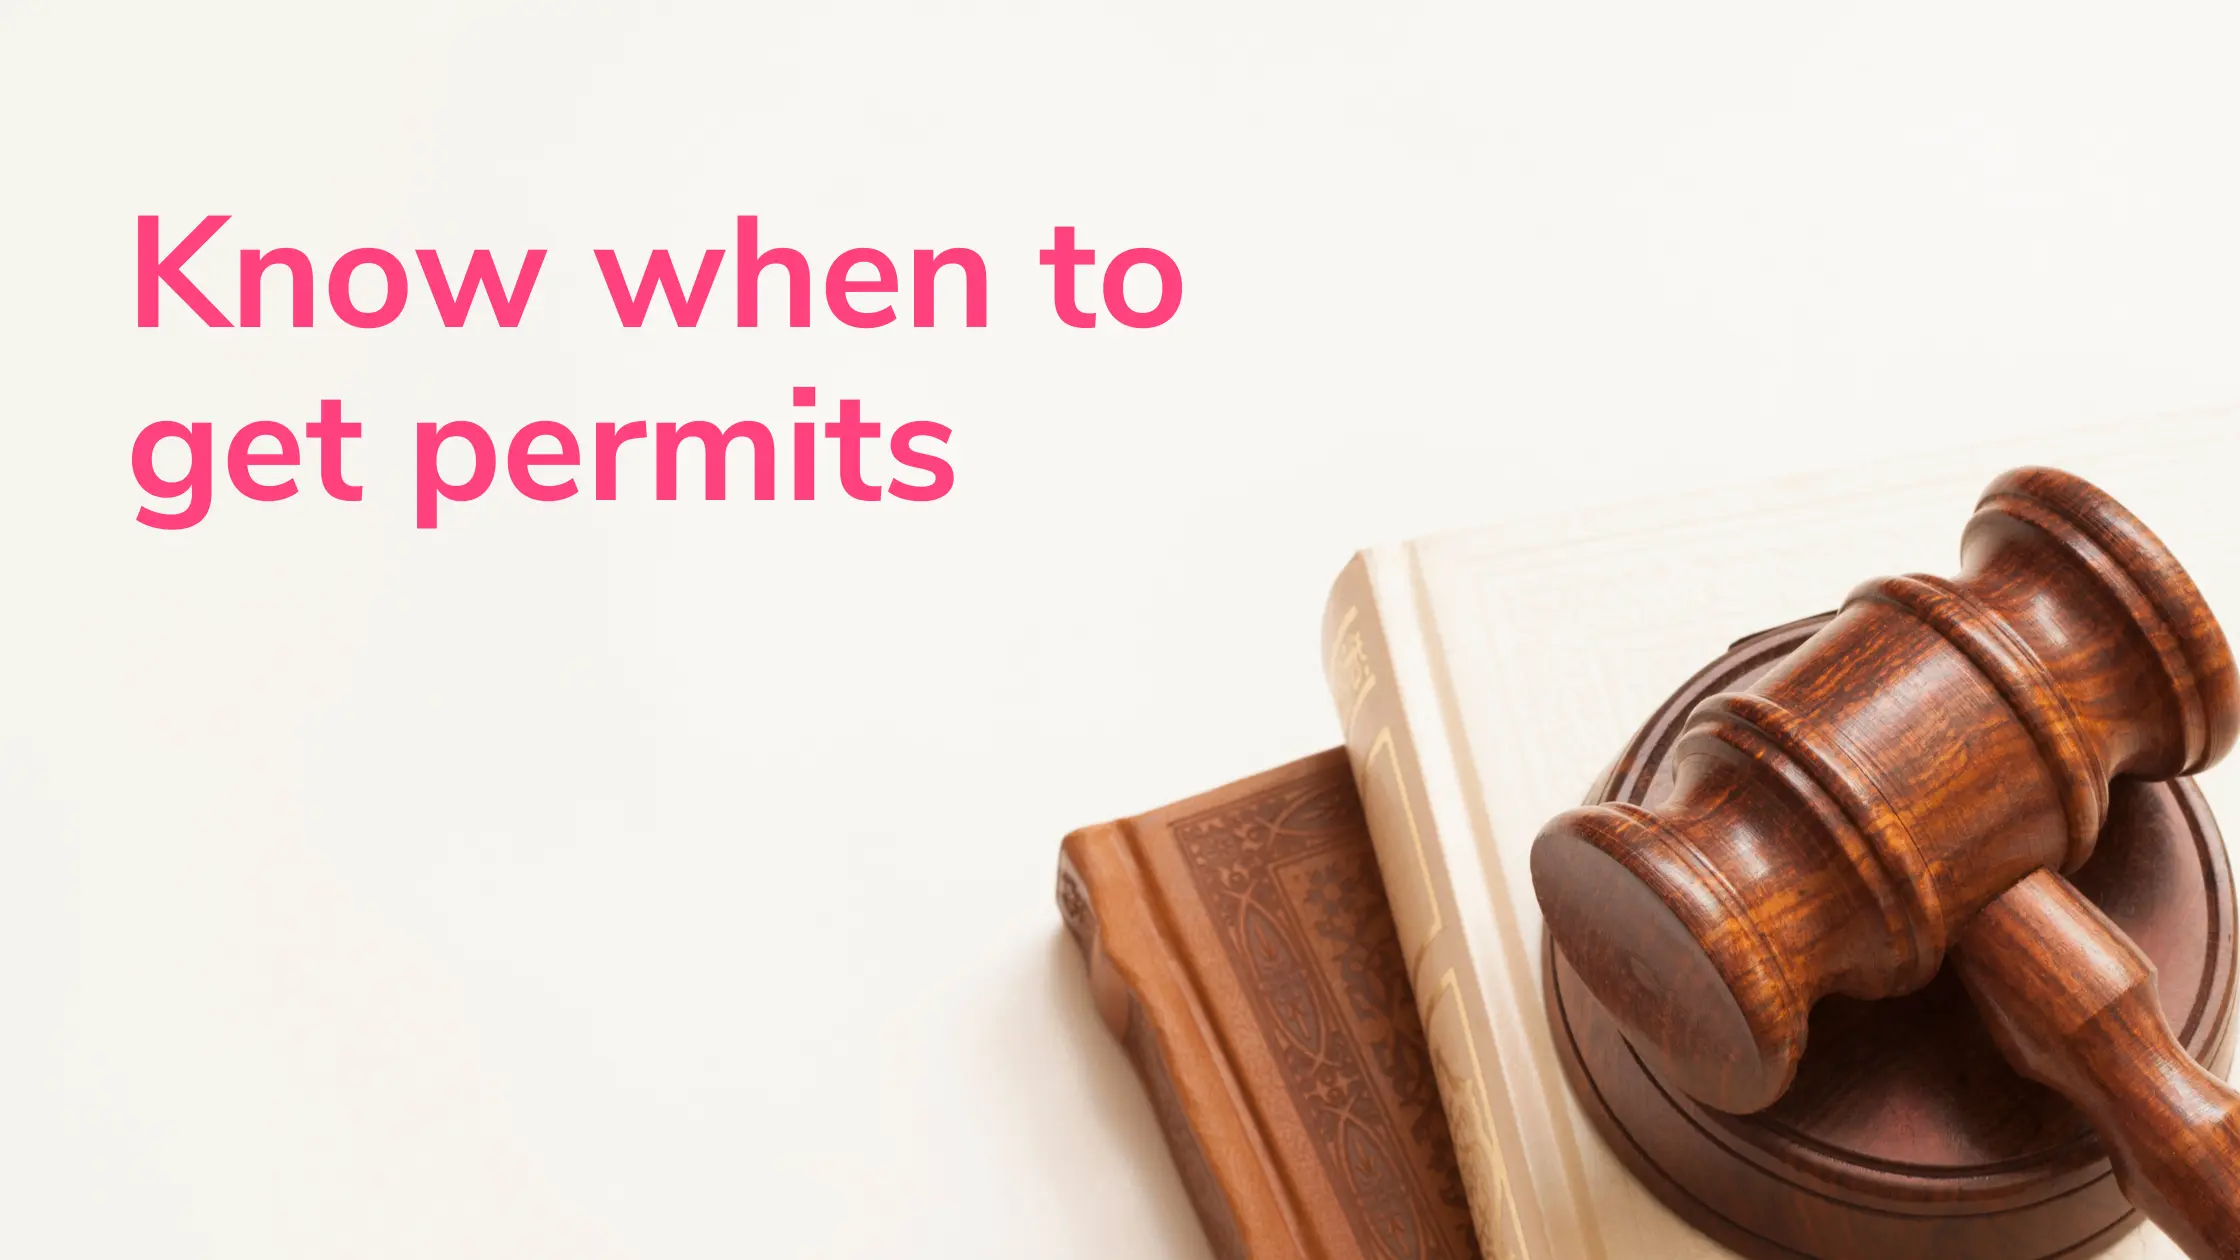 Know when to get permits.